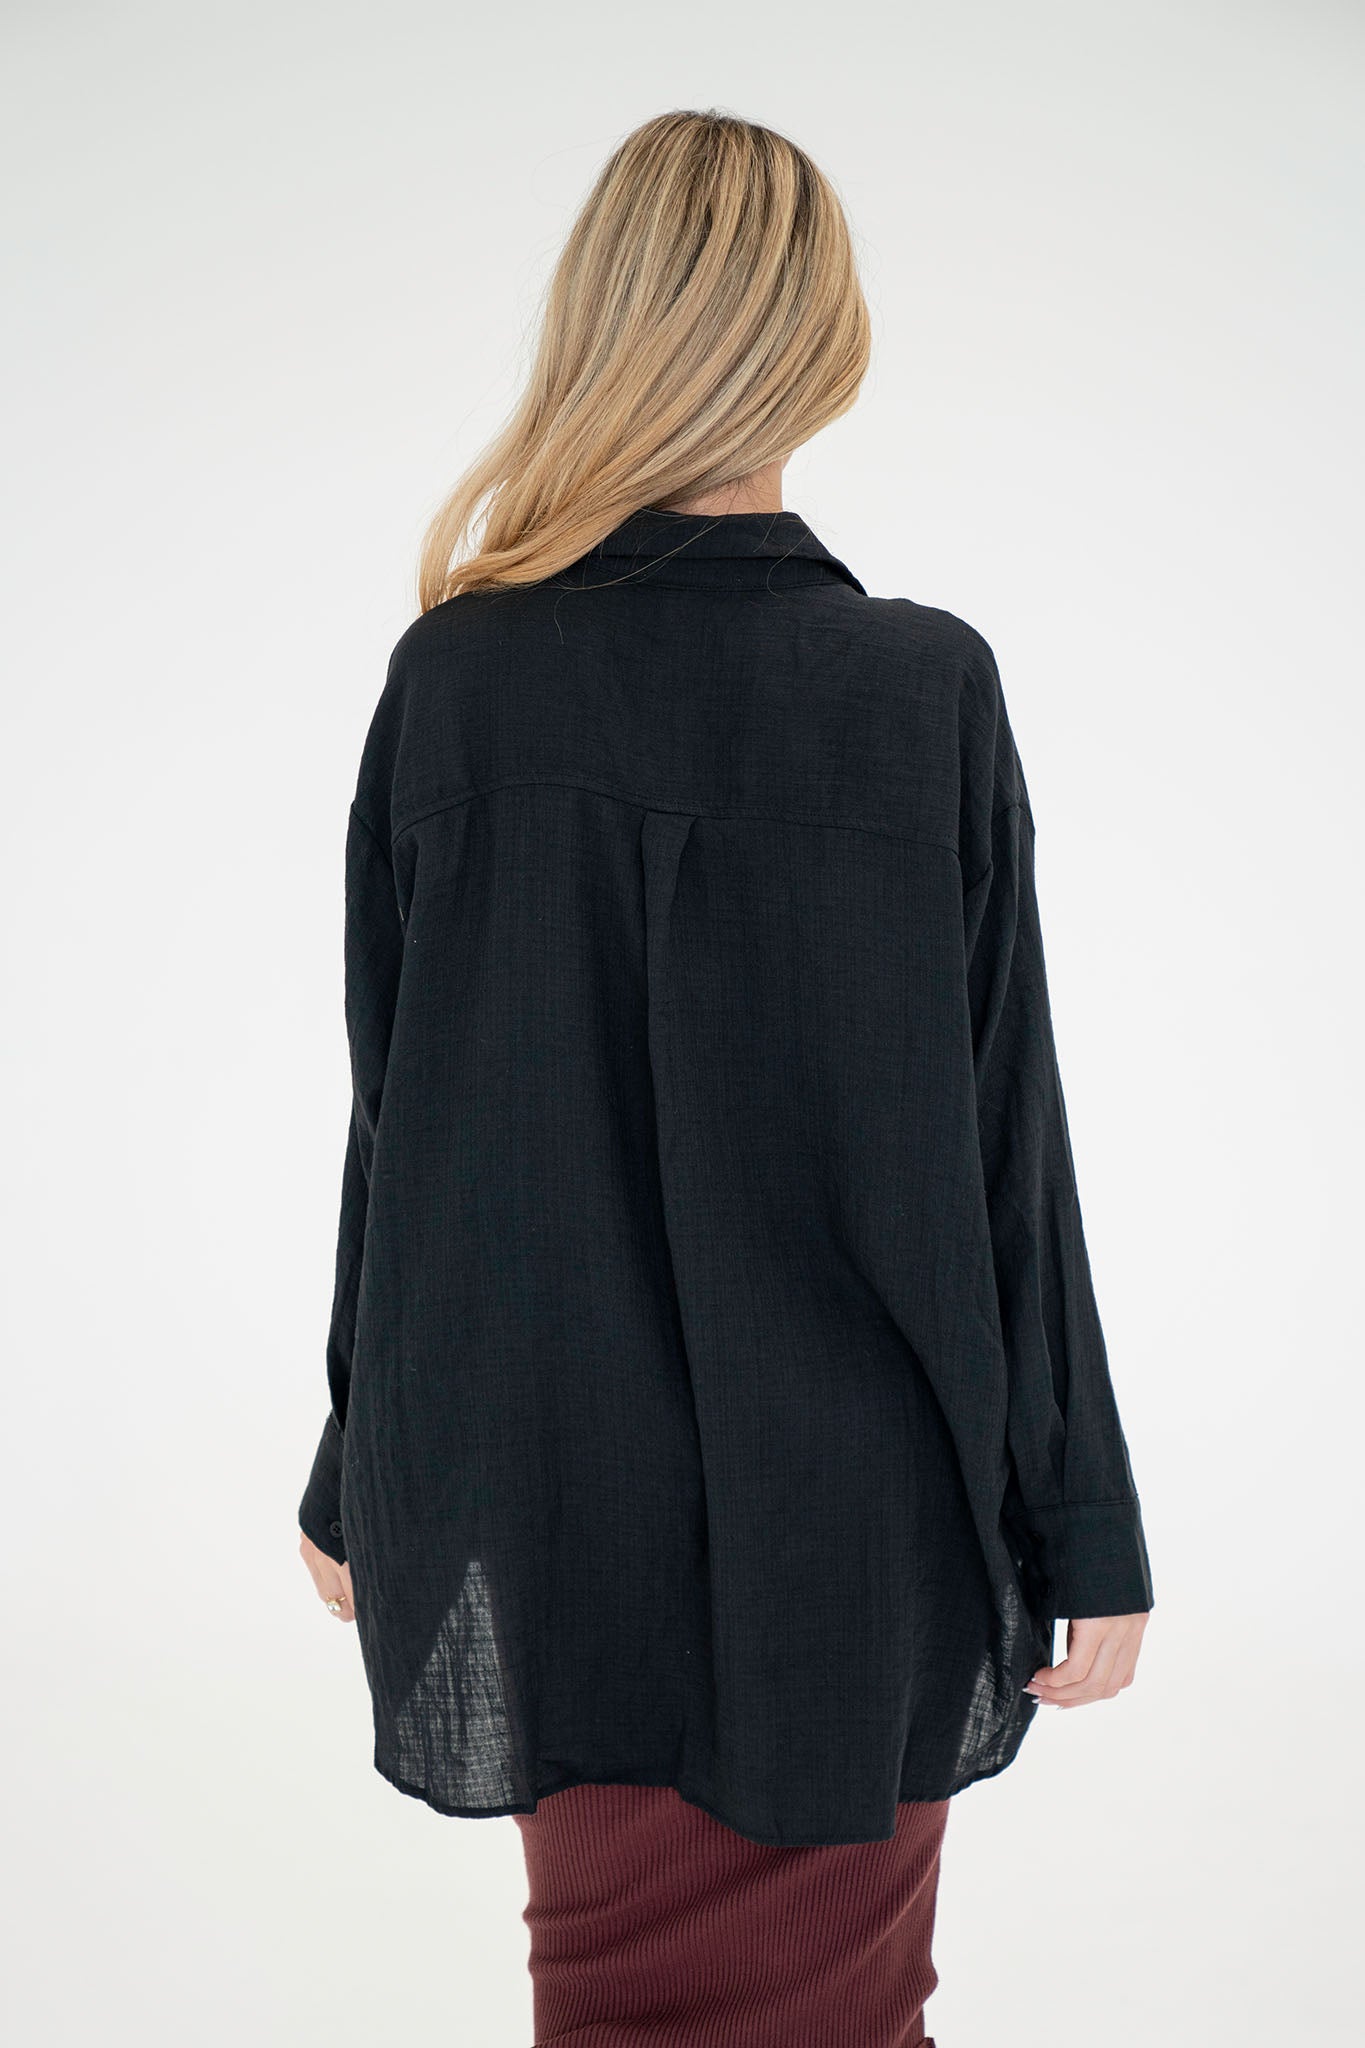 View 3 of Sea Campion Oversized Shirt in Black, a Tops from Larrea Cove. Detail: .